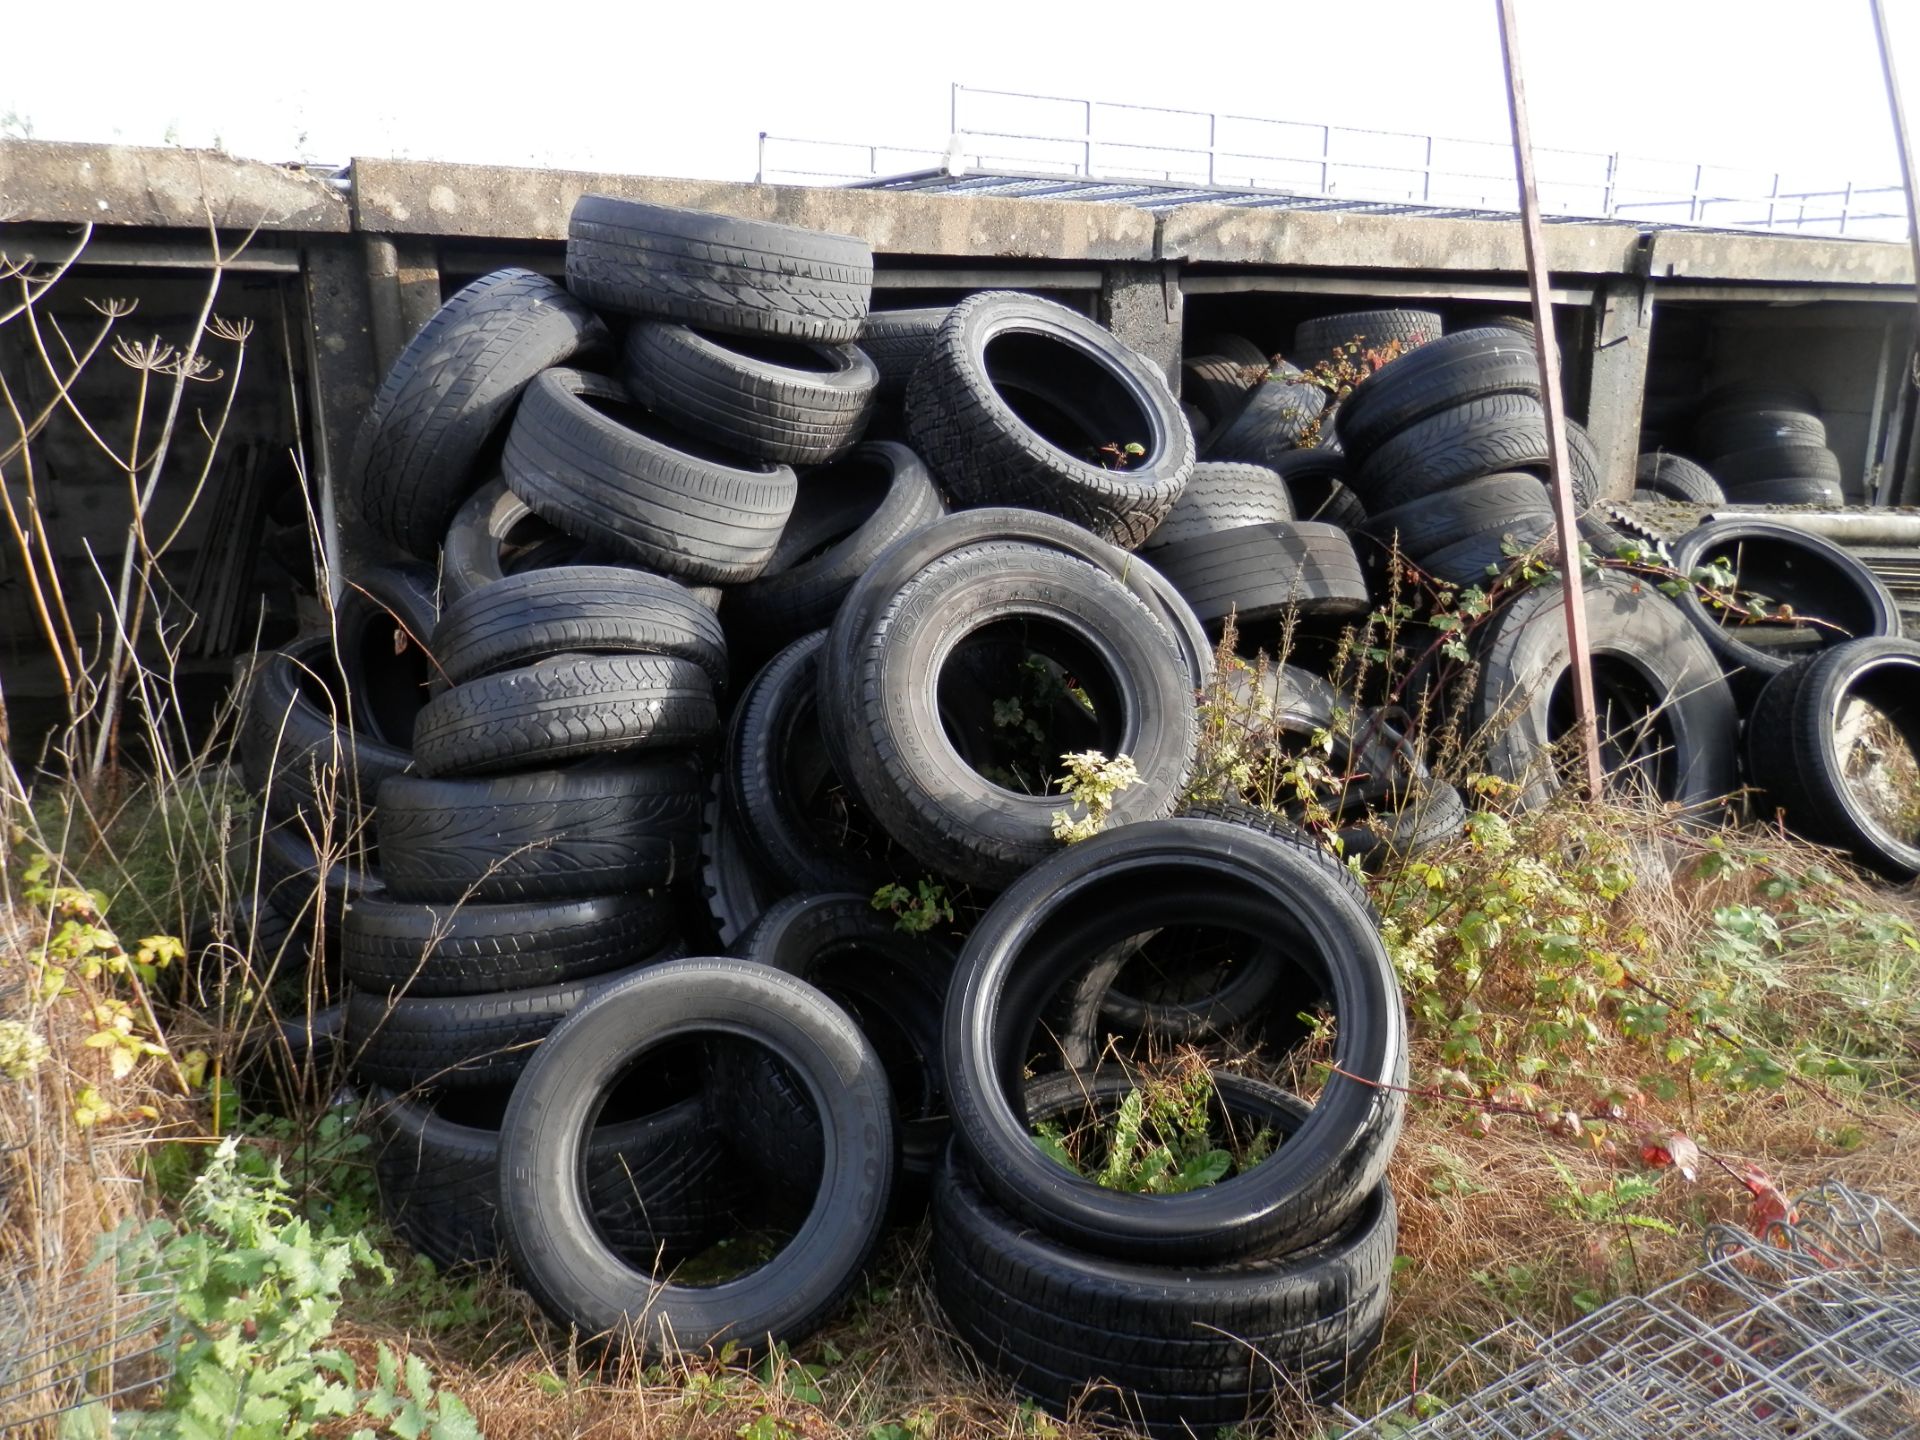 3 GARAGES FULL OF USED, PART WORN TYRES. ASSORTED FROM CAR TO LORRY TYRES. POSSIBLY 800+ - Bild 6 aus 9